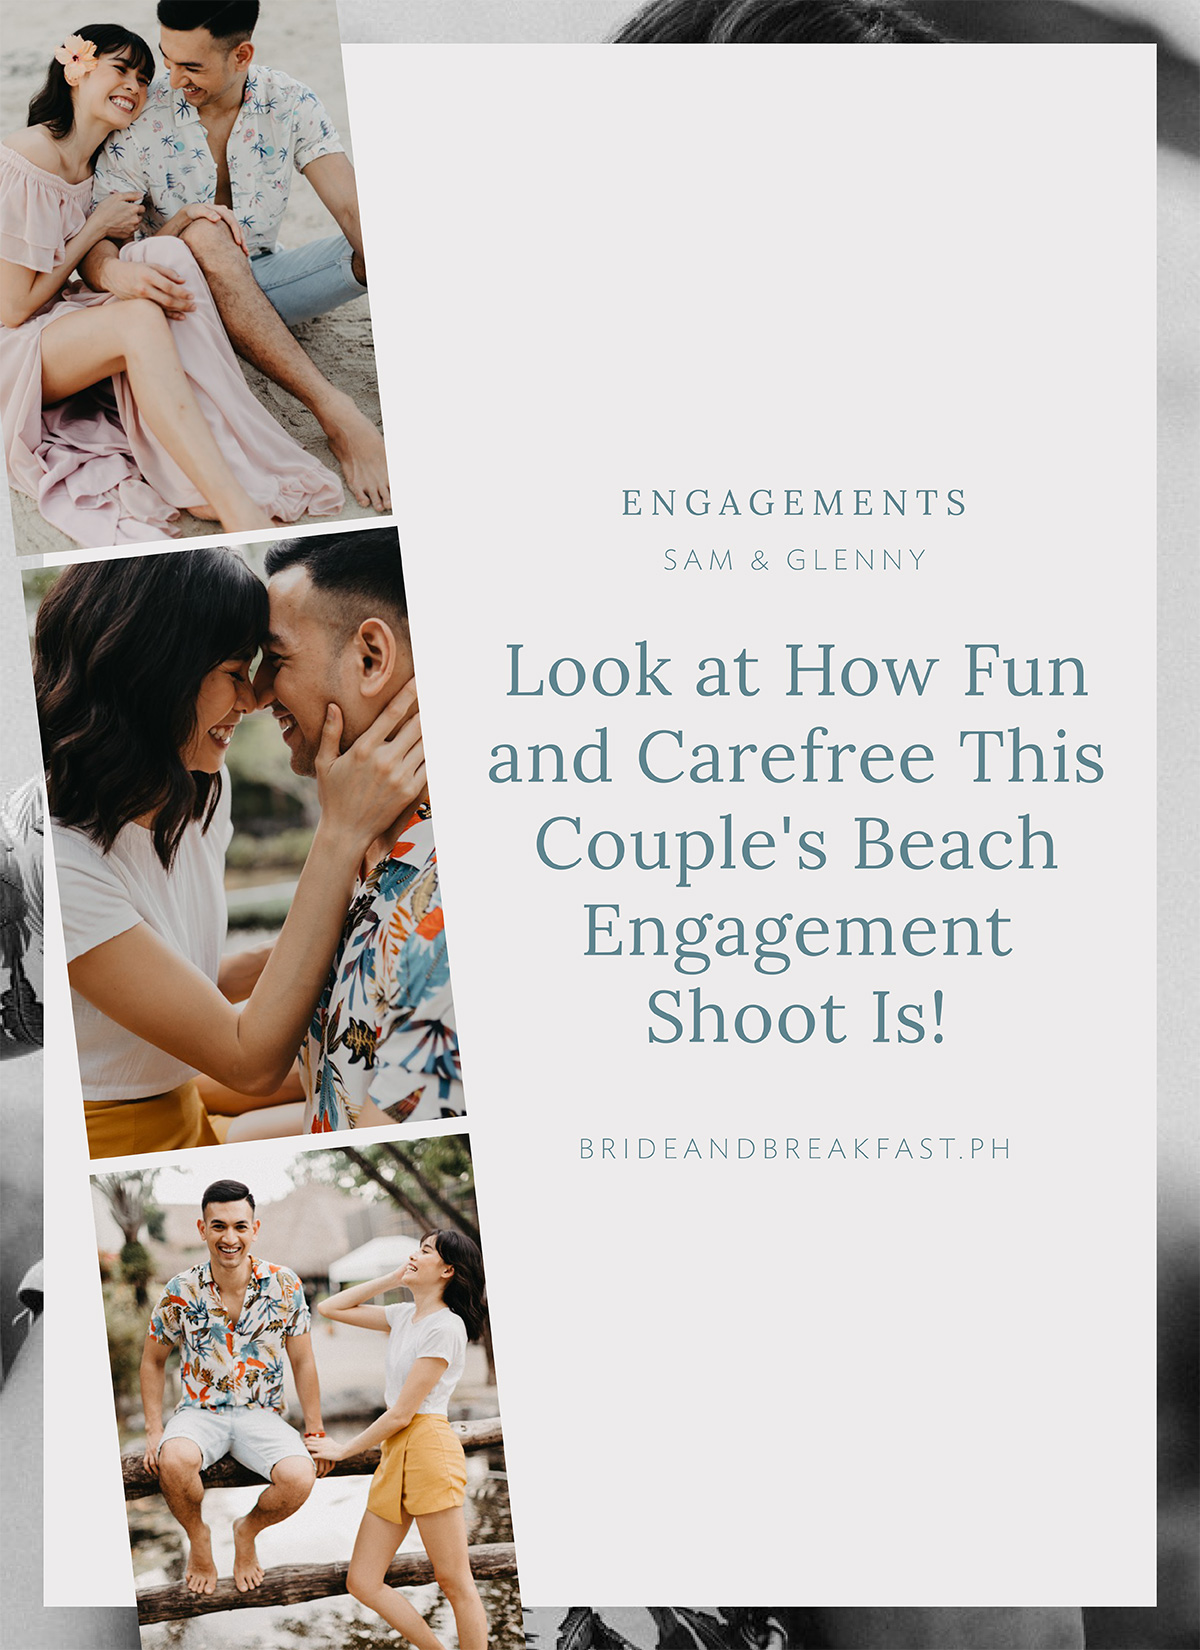 Look at How Fun and Carefree This Couple's Beach Engagement Shoot Is!